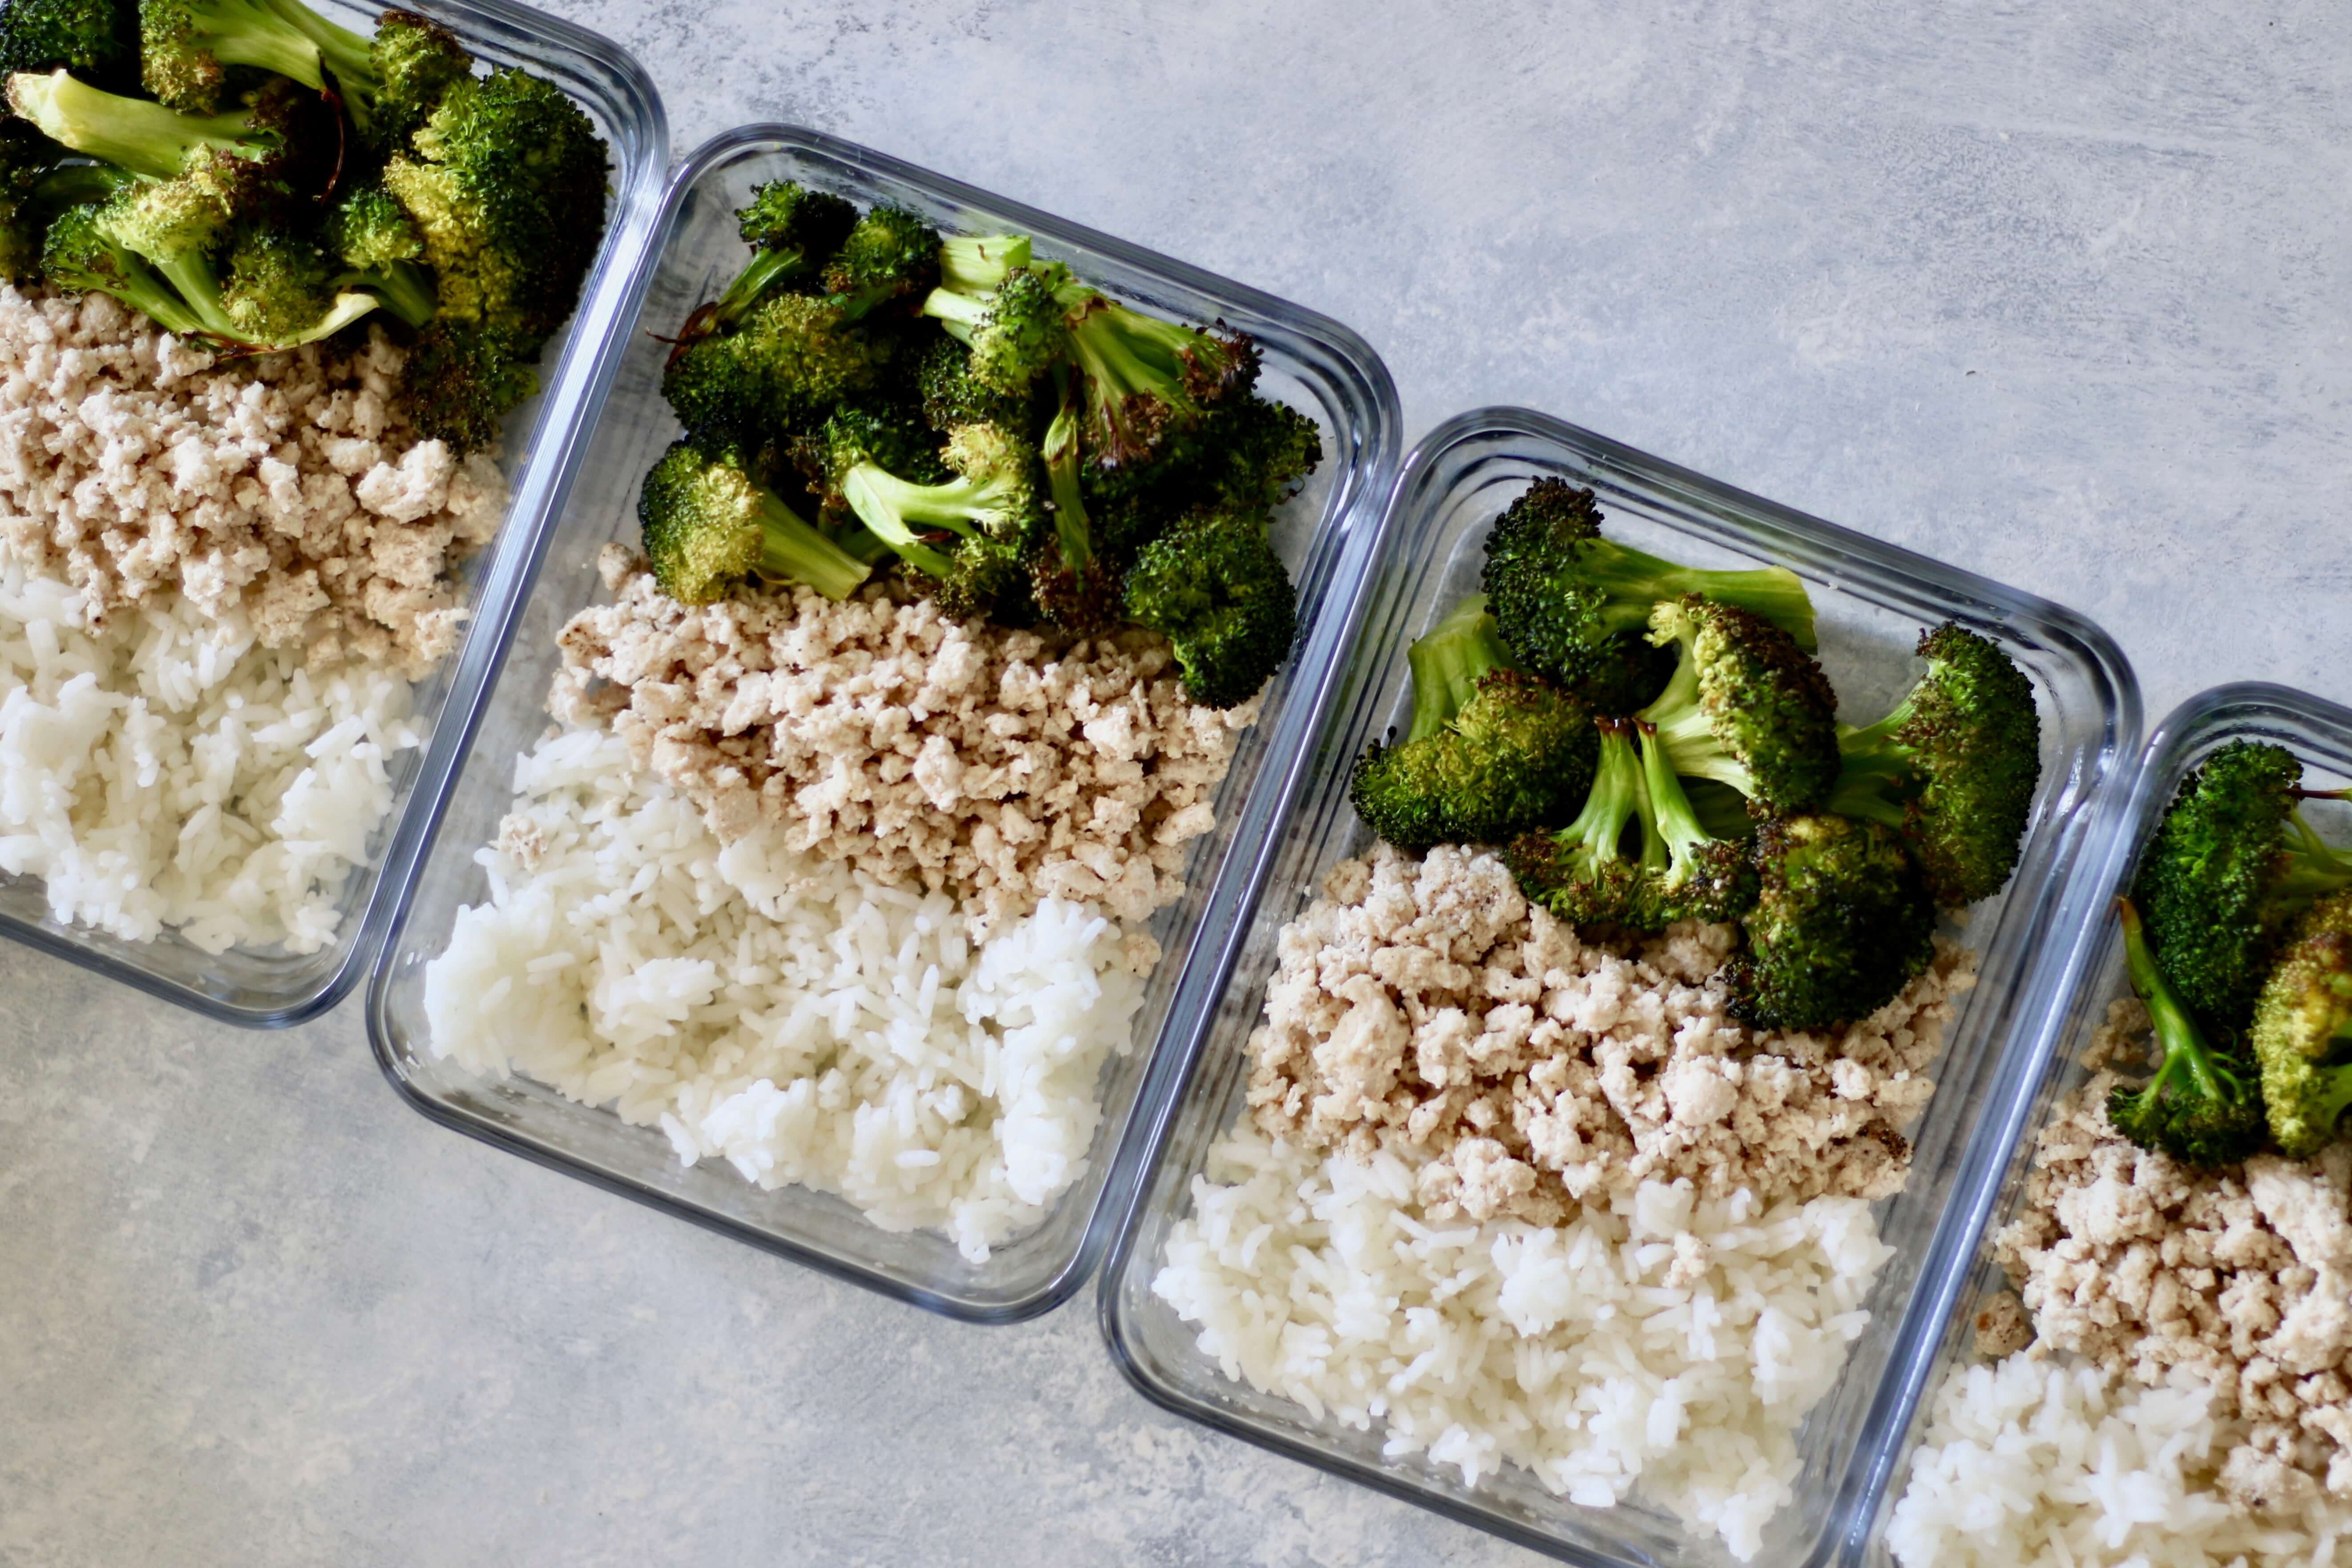 20 Simple Meals to Help Your Clients Hit Their Macros: Ground Turkey, Rice & Broccoli